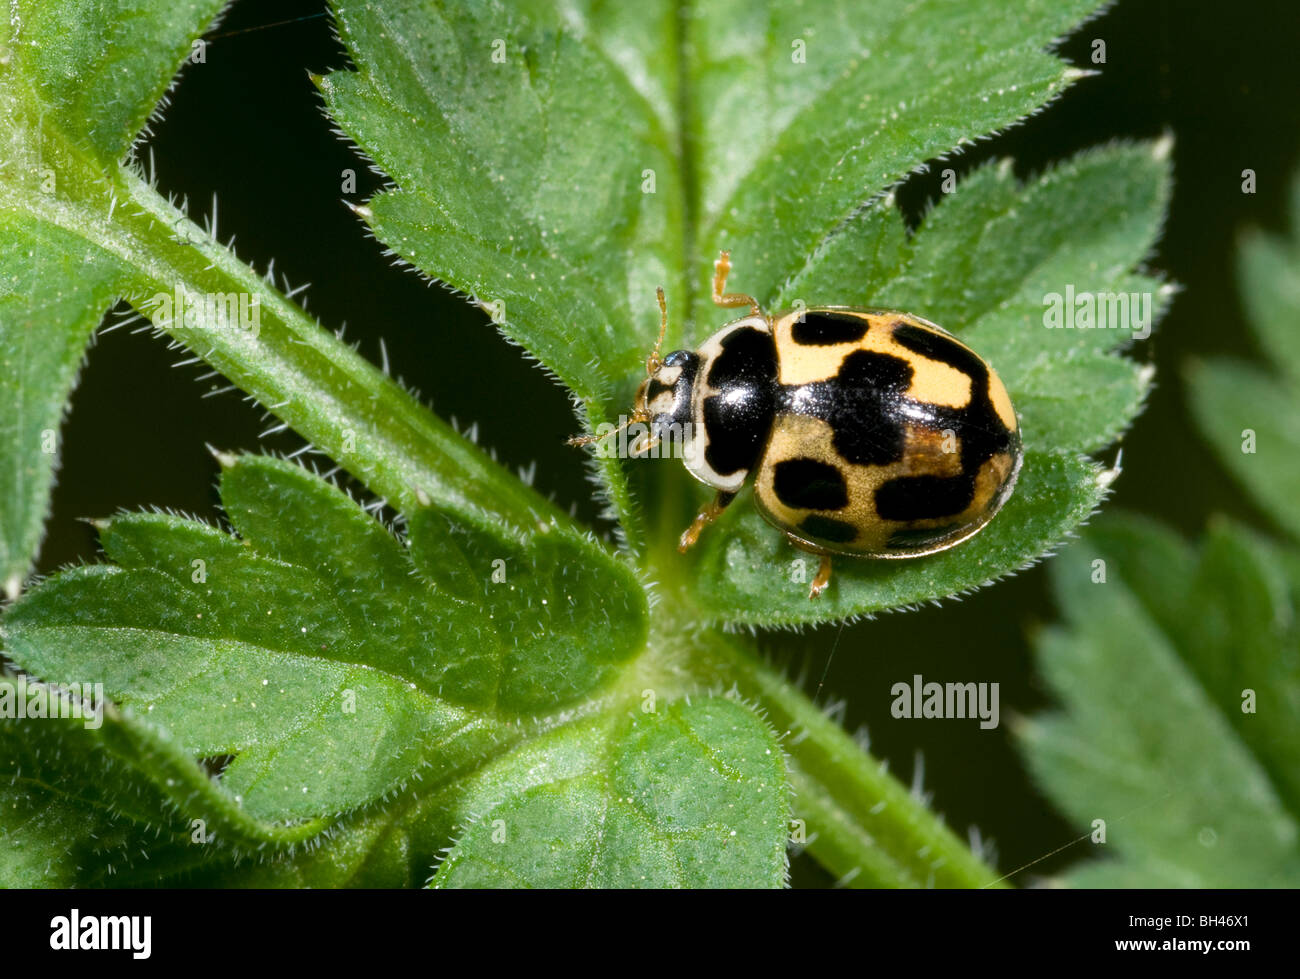 14-spot ladybird (Propylea 14-punctata). Adult. Joined spots form. On leaf in woodland. Stock Photo